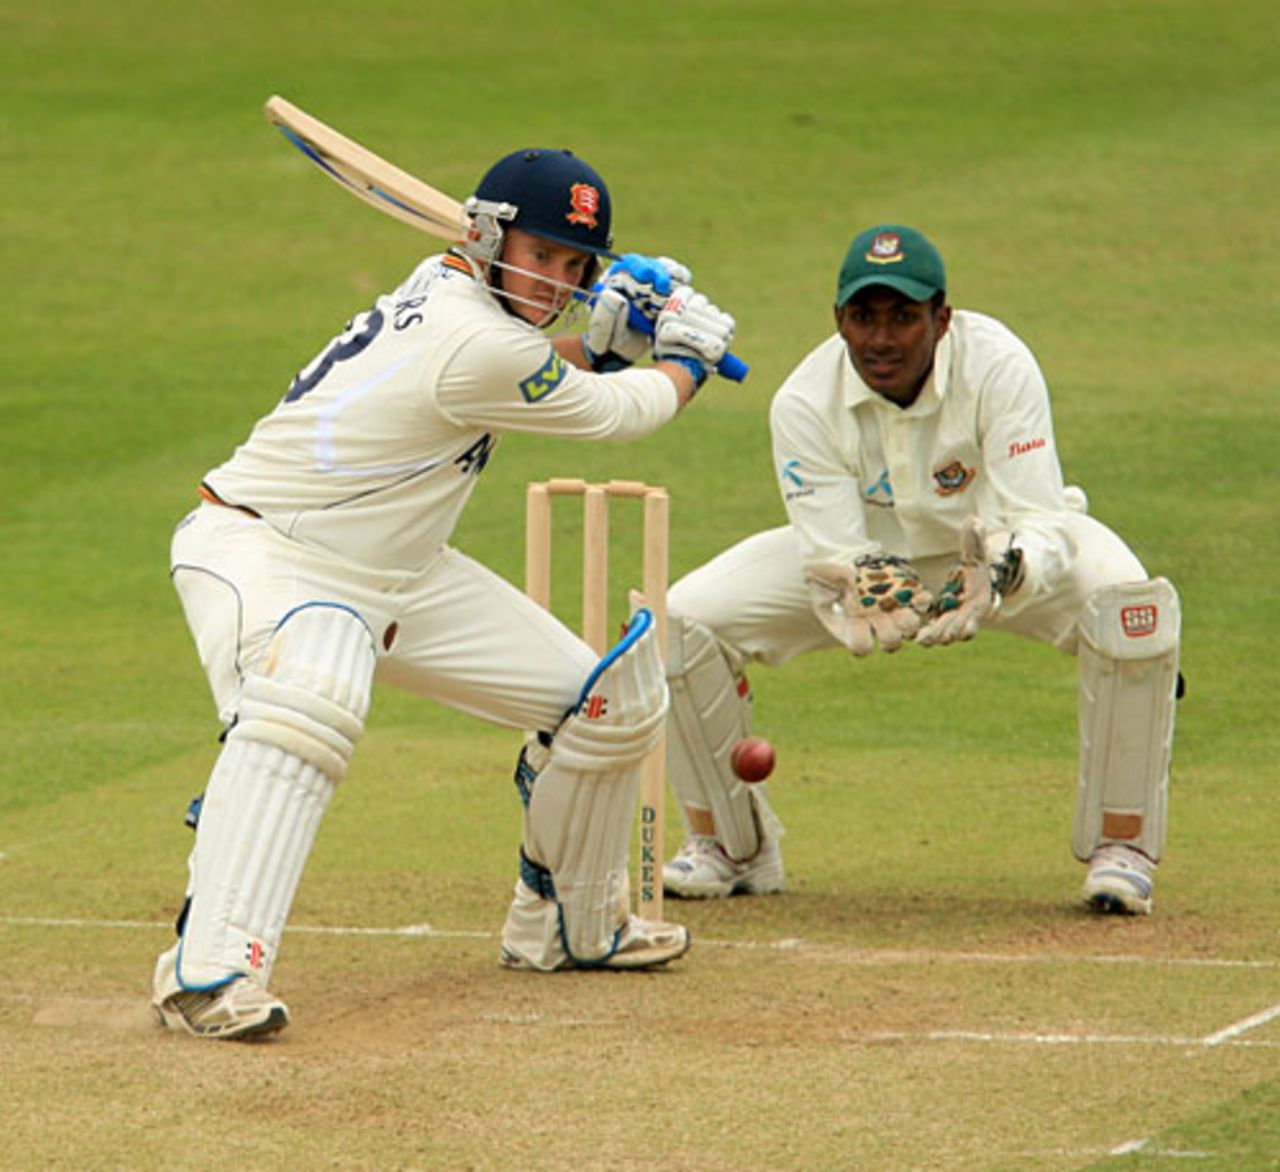 John Maunders made the most of Bangladesh's inexperienced pace attack with his eighth first-class hundred, Essex XI v Bangladeshis, Chelmsford, 2nd day, May 15, 2010